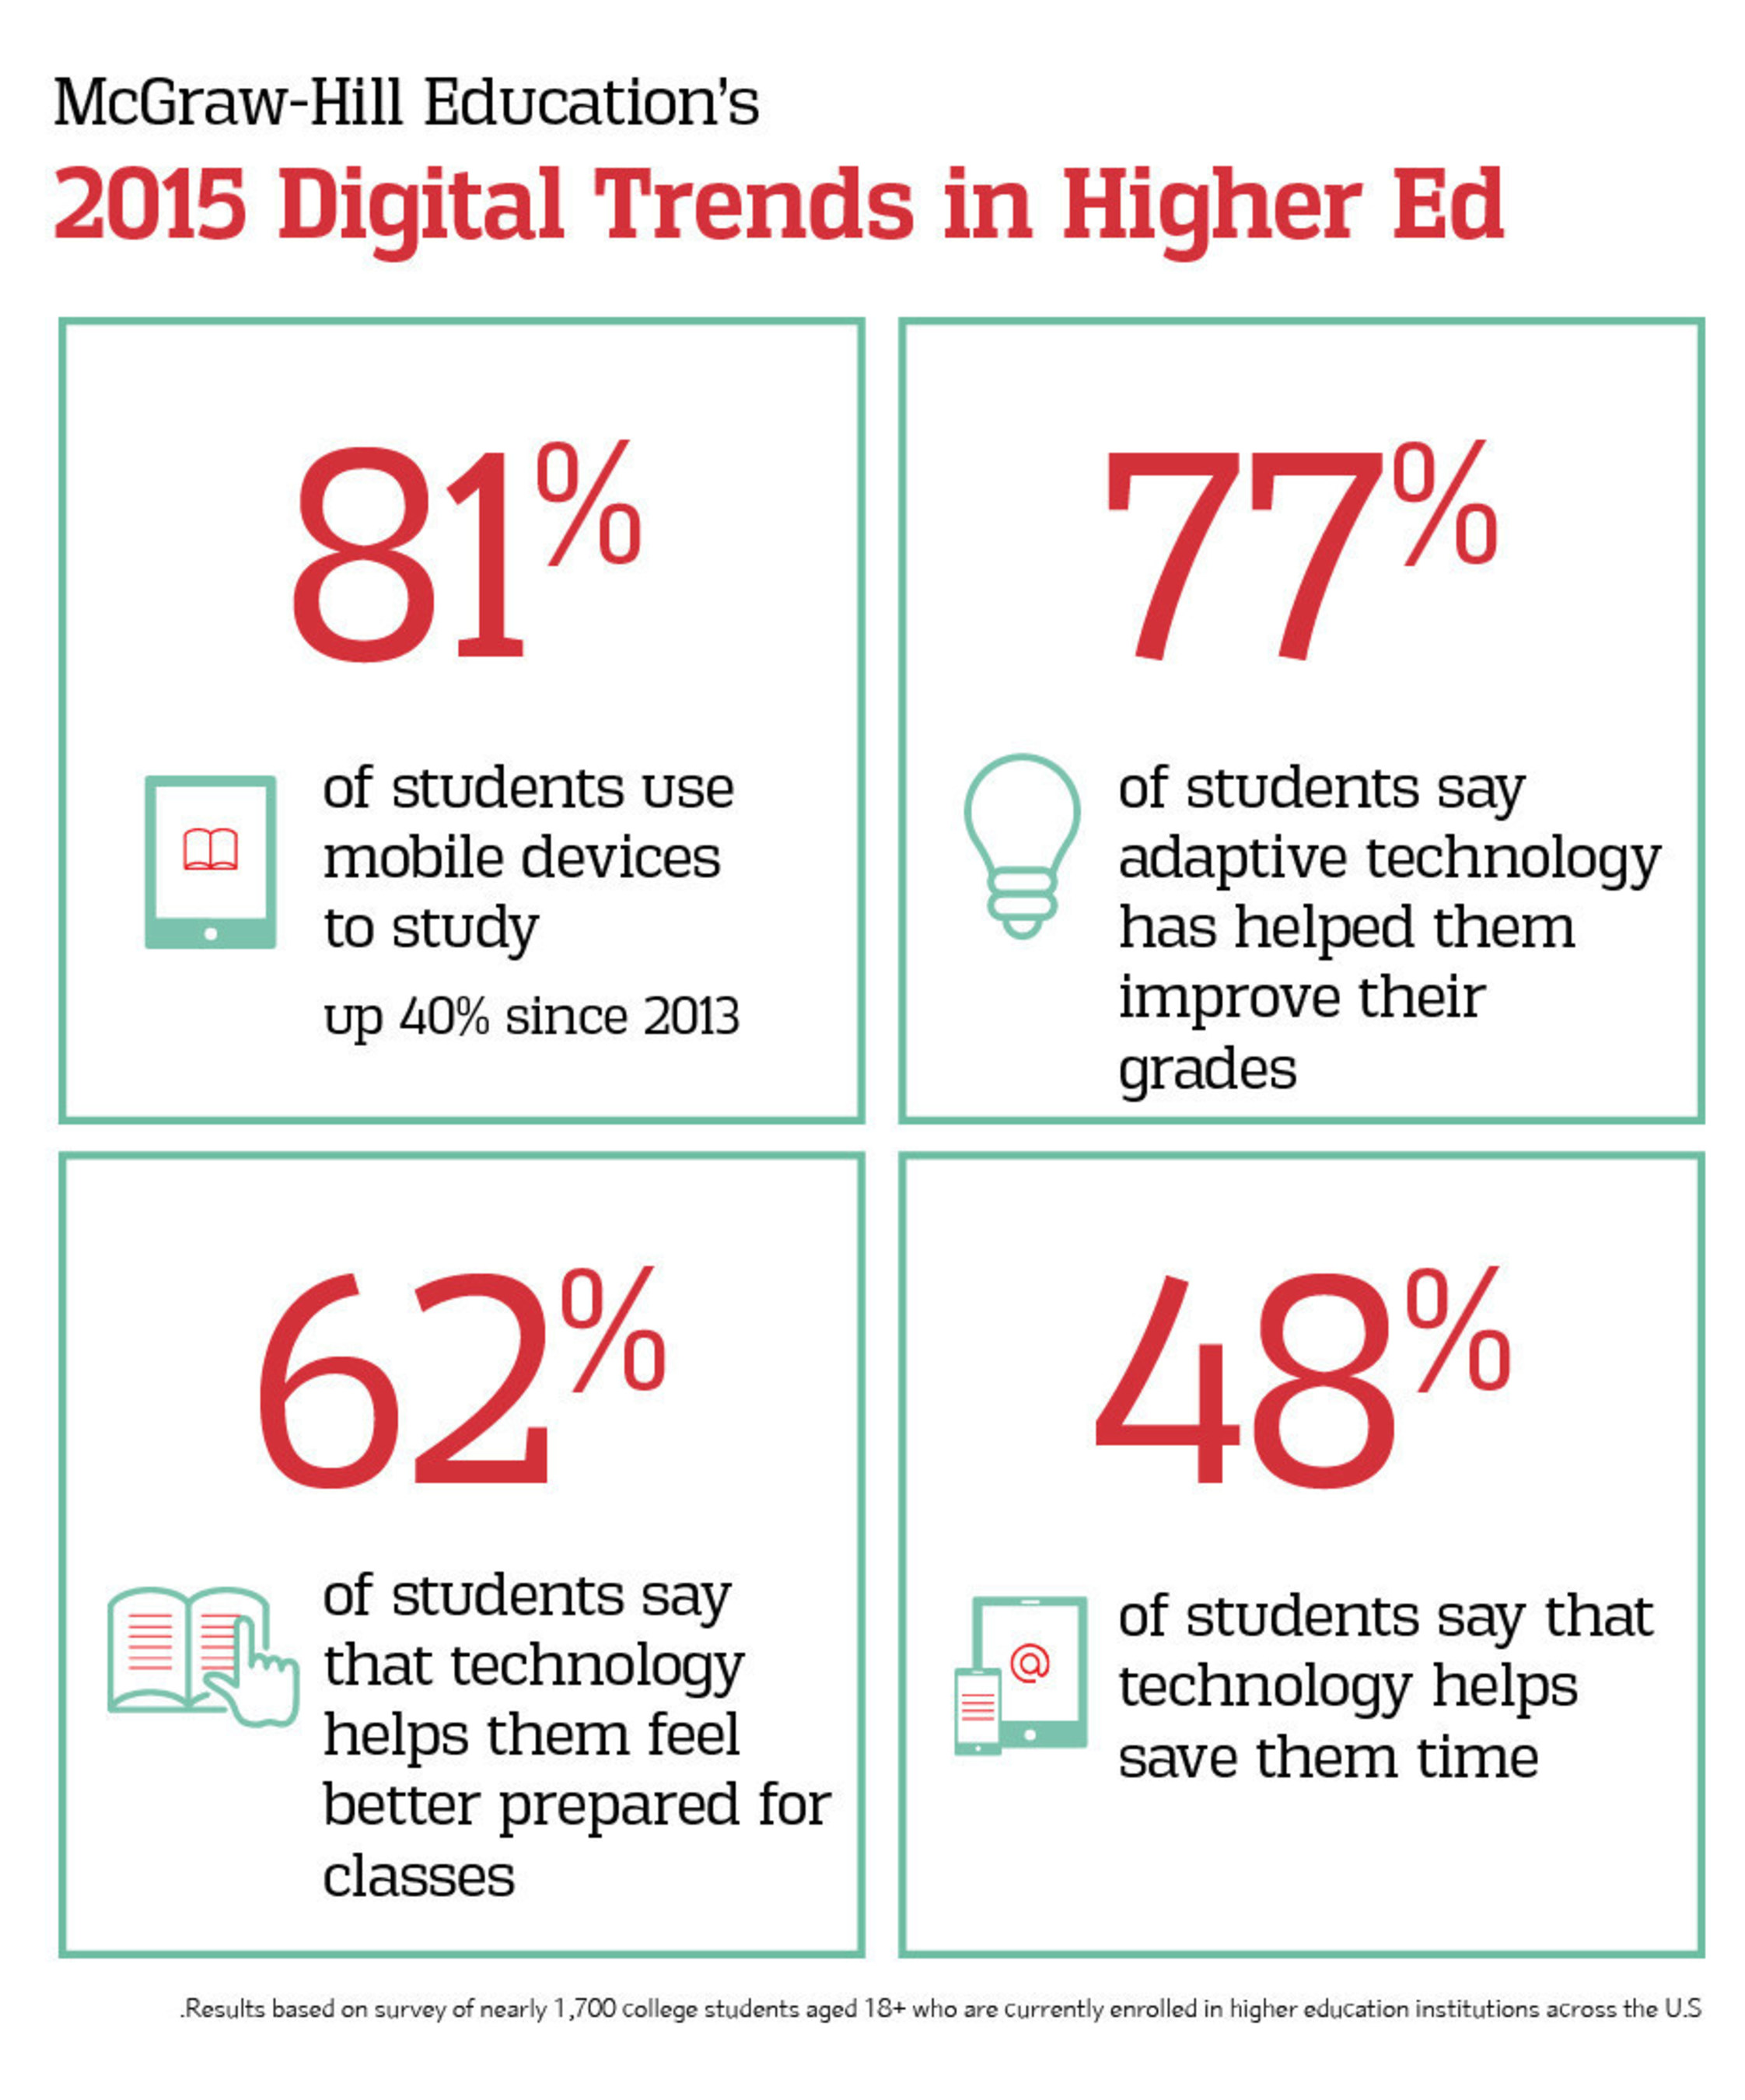 McGraw-Hill Education's 2015 Digital Trends in Higher Ed